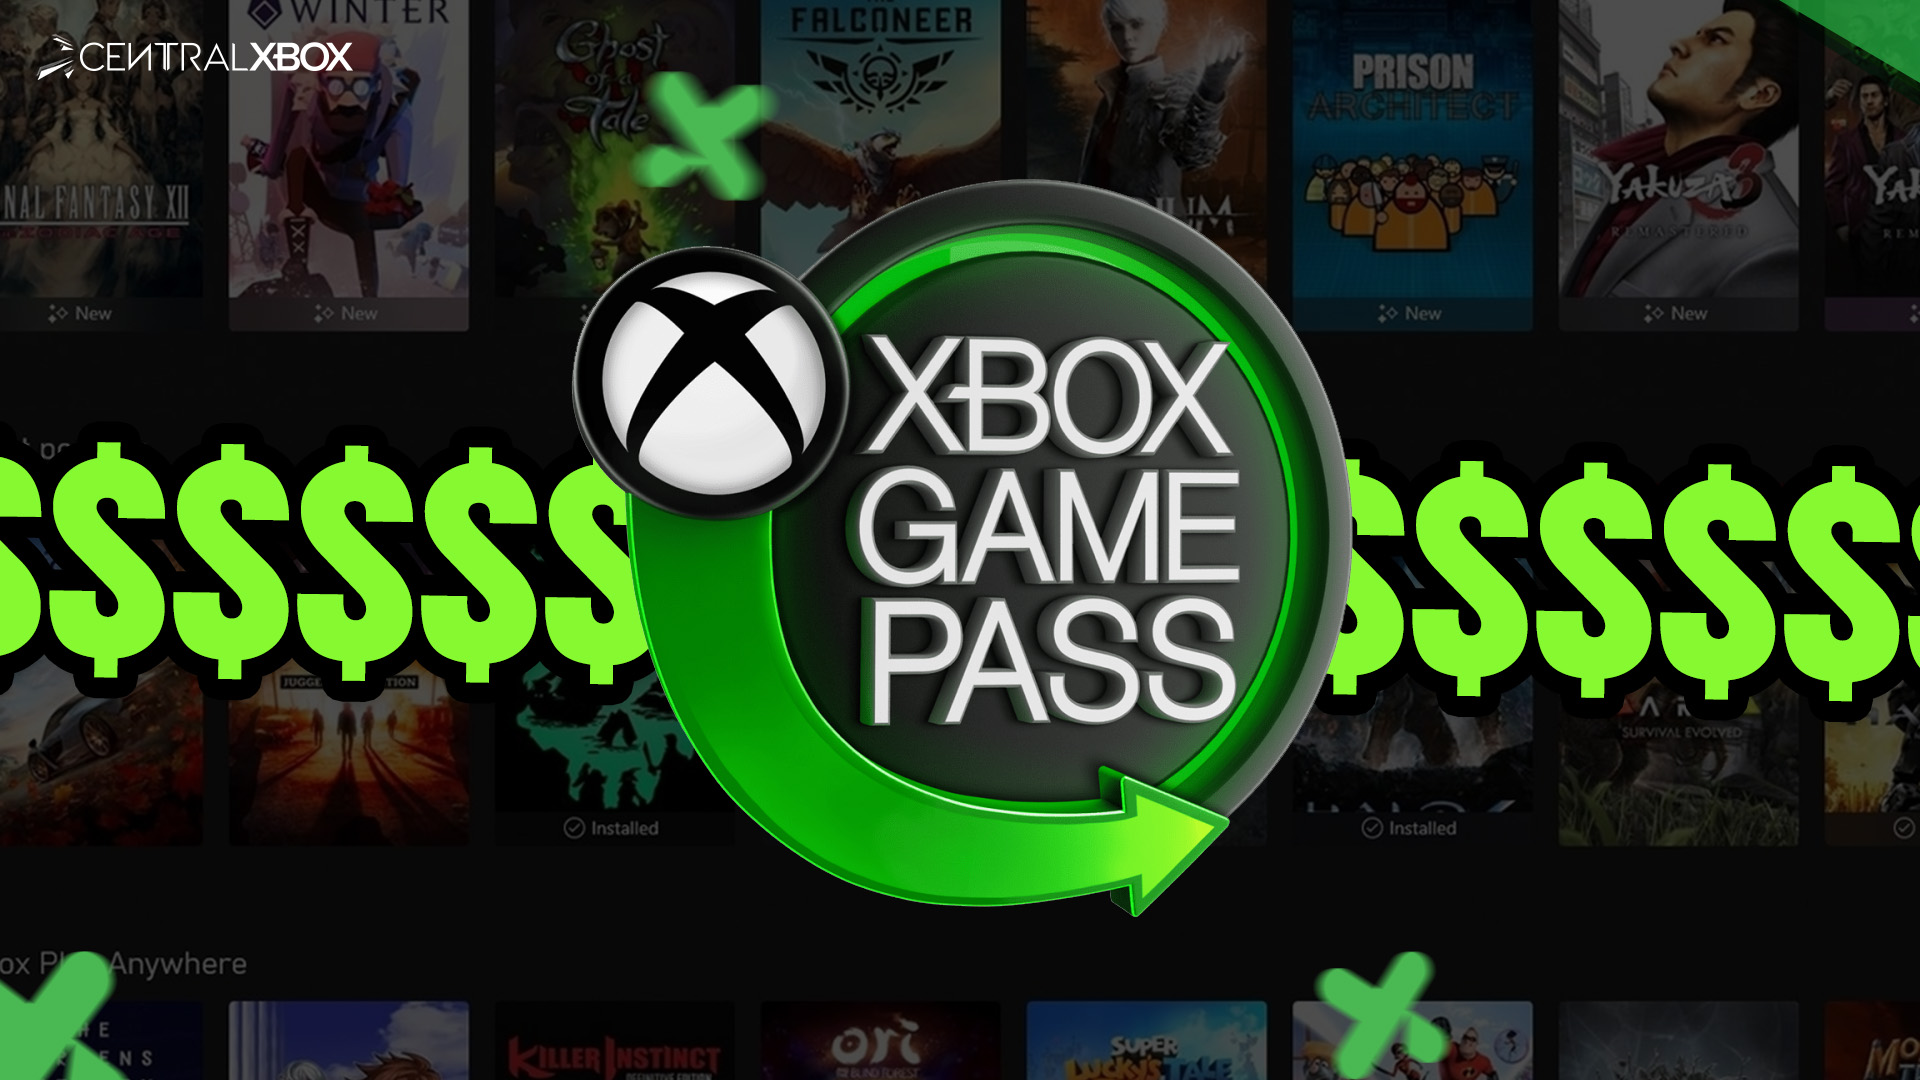 BREAKING: Xbox is making new changes to the Game Pass transfer system and subscription limit